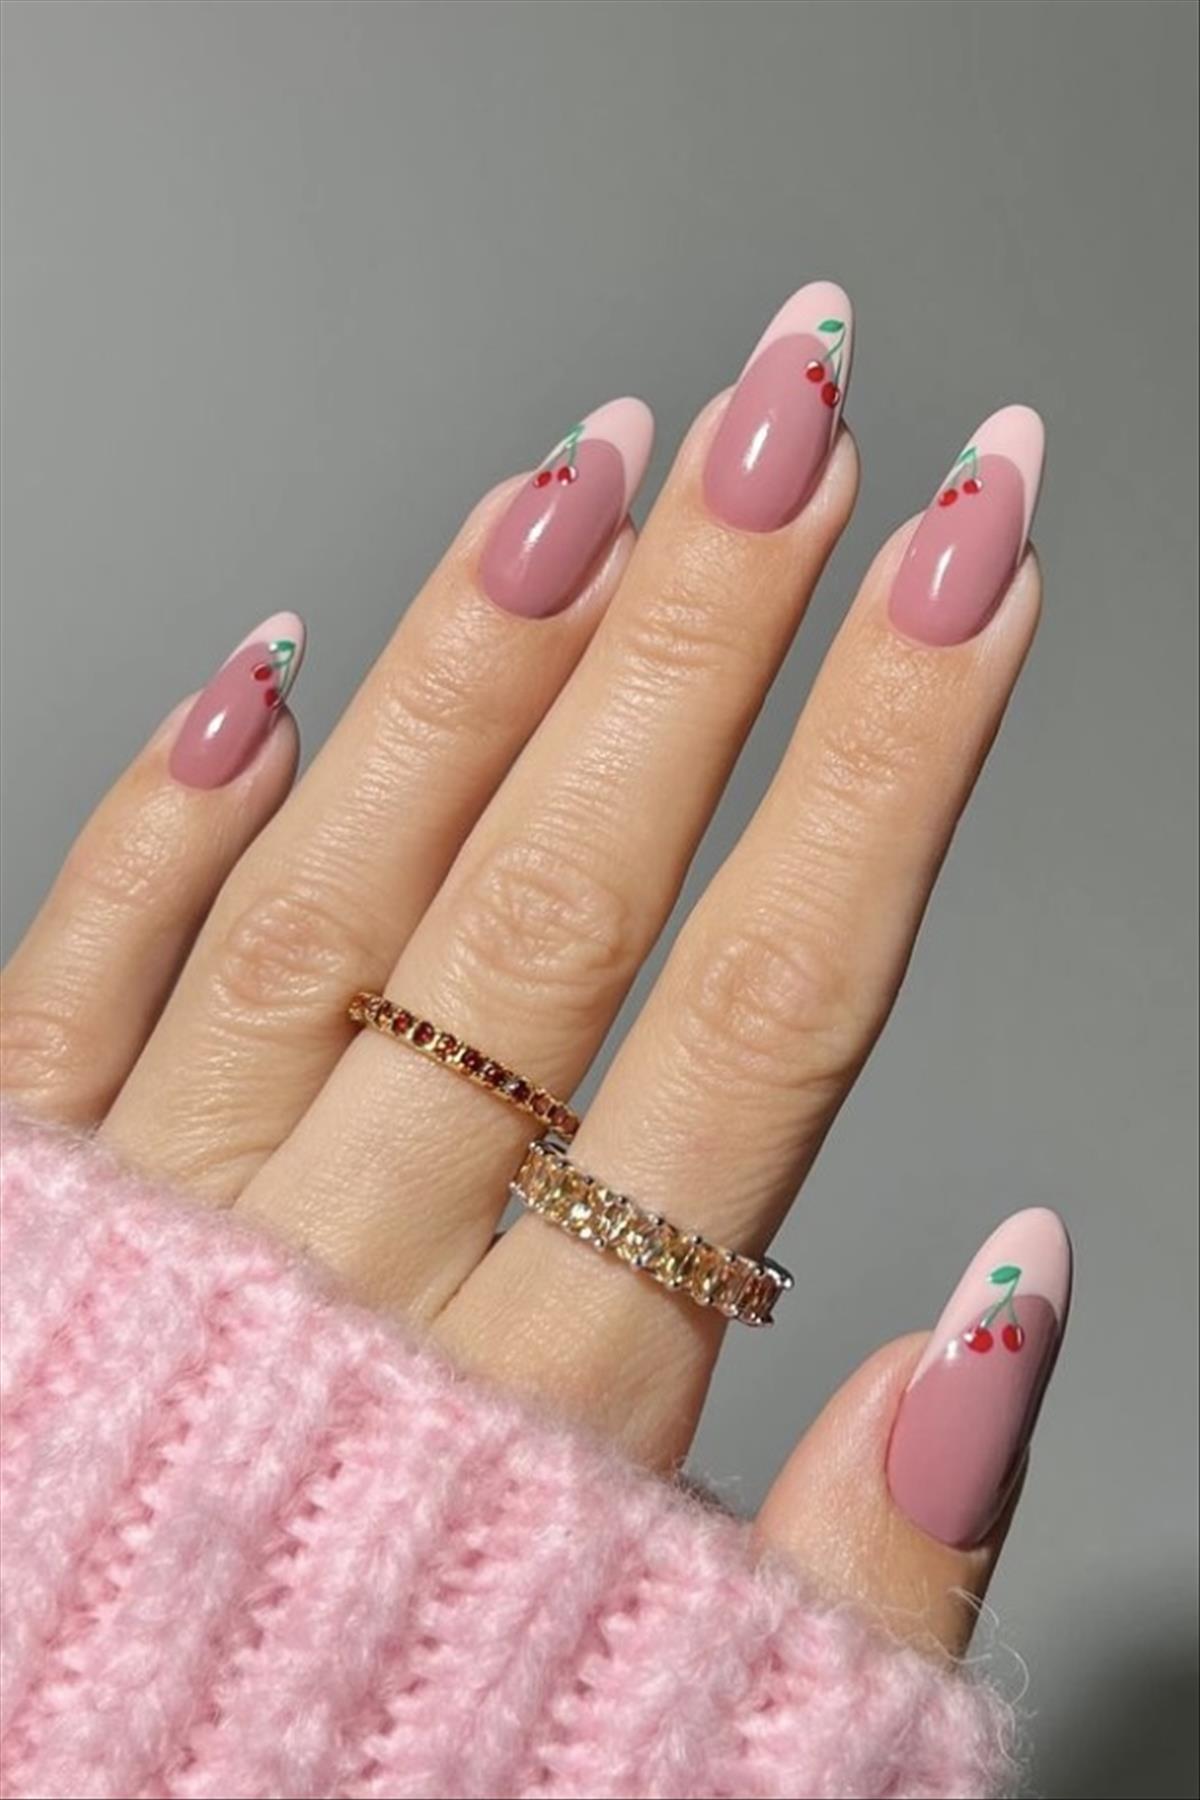 Pretty fruit nail designs perfect for Summer nails 2022